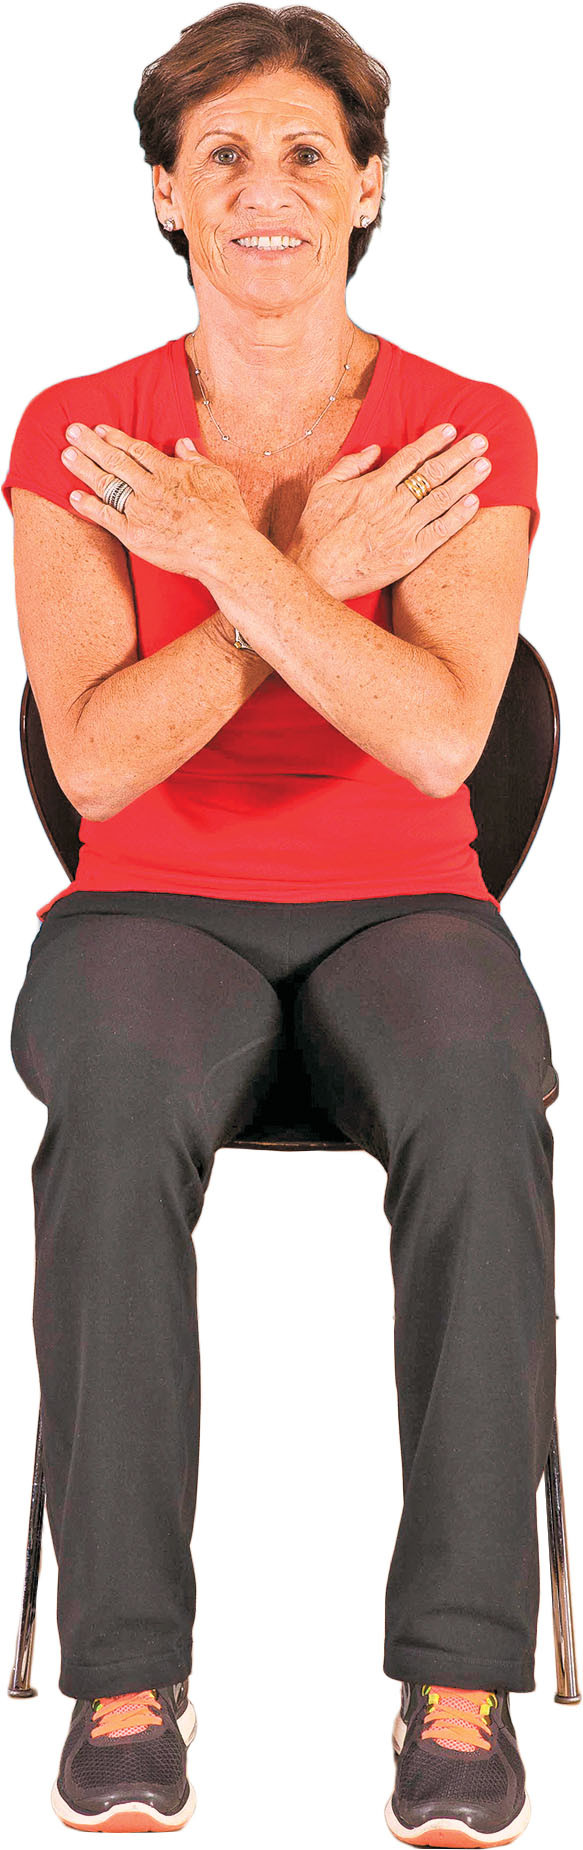 photo of a woman performing the sit-to-stand exercise step 1: sitting in a chair with her arms crossed over her chest